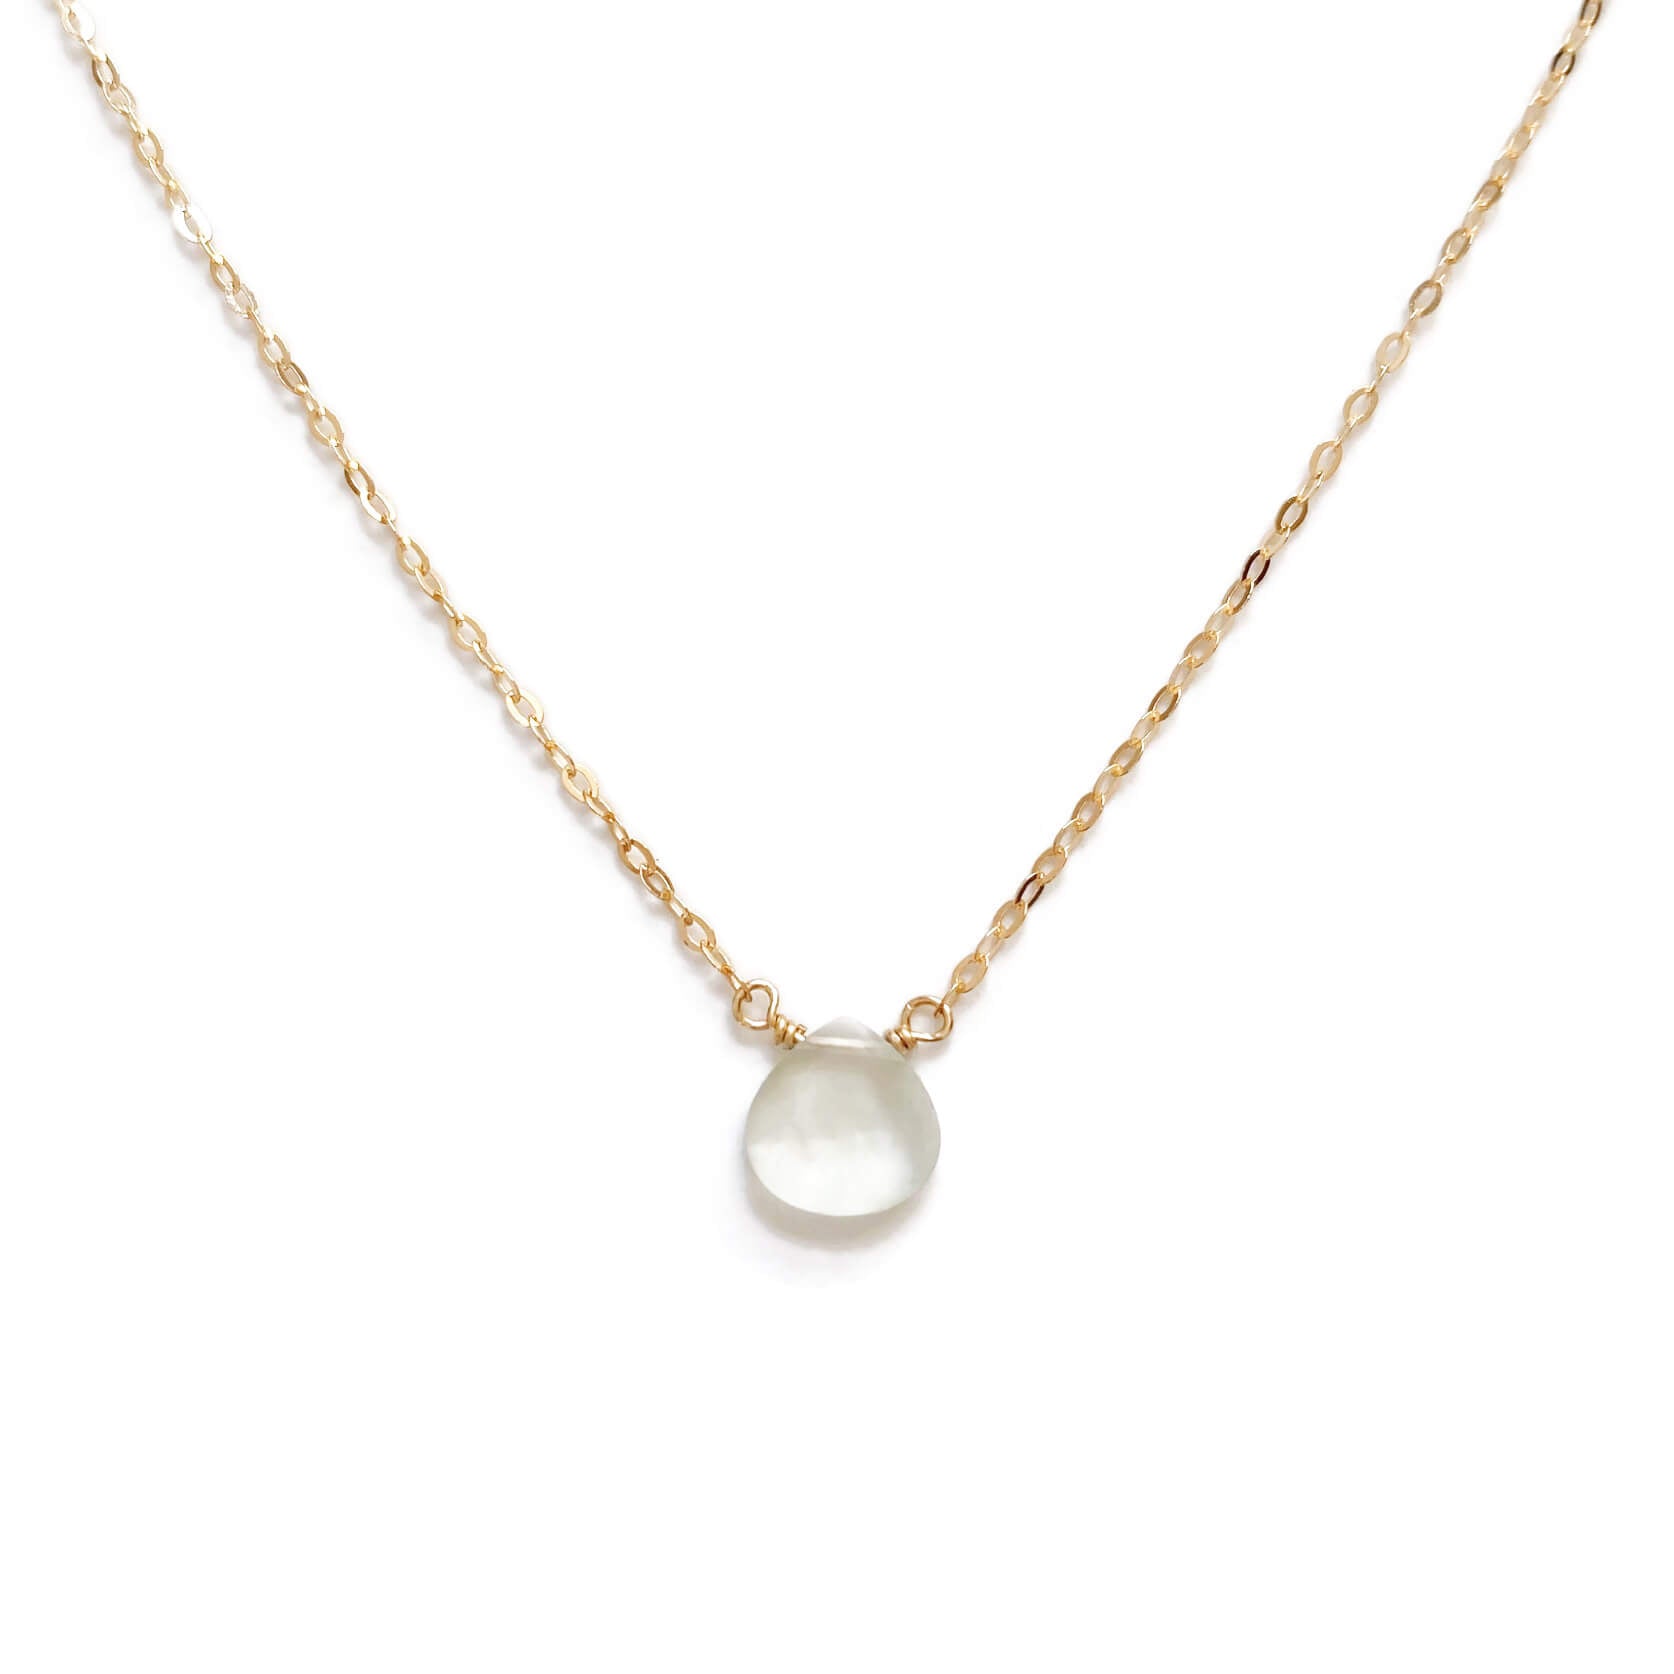 The elegant yet simple prehnite necklace is made in our San Francisco studio with your choice of 14k gold, gold fill or sterling silver chain.